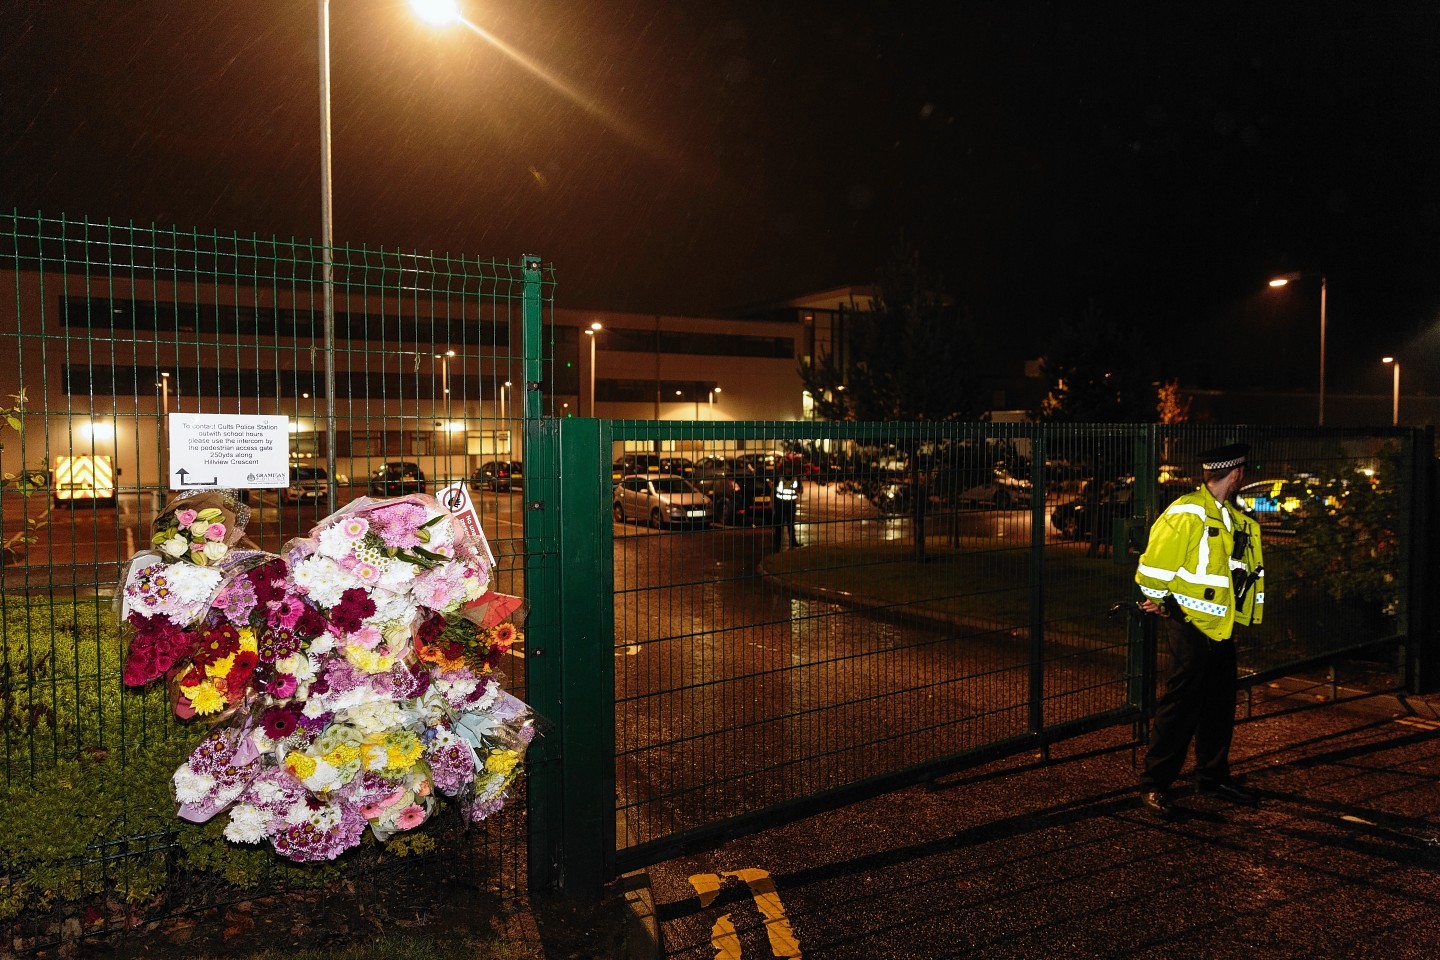 More floral tributes at the gates to Cults Academy